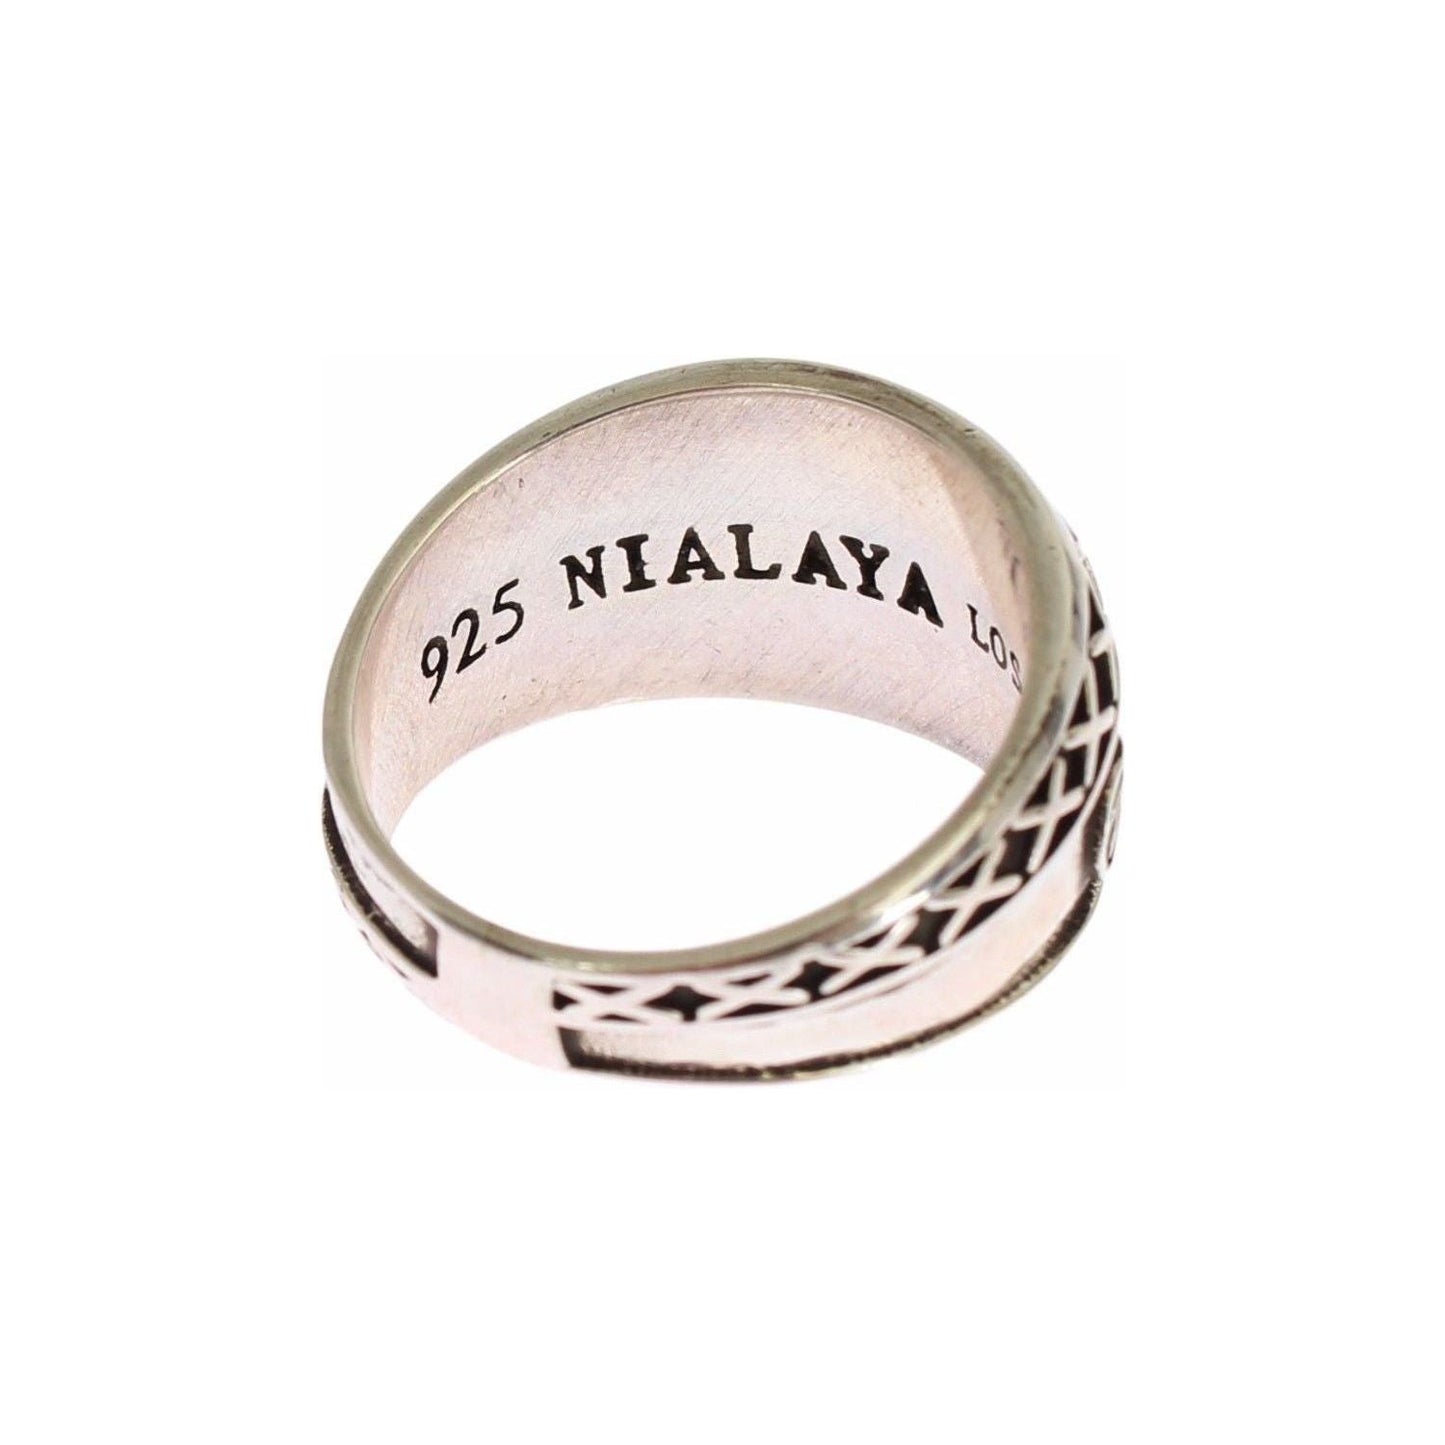 Nialaya Elegant Silver Band with Black Accents Ring silver-rhodium-925-sterling-ring s-l1600-23-1-e48bd937-778.jpg